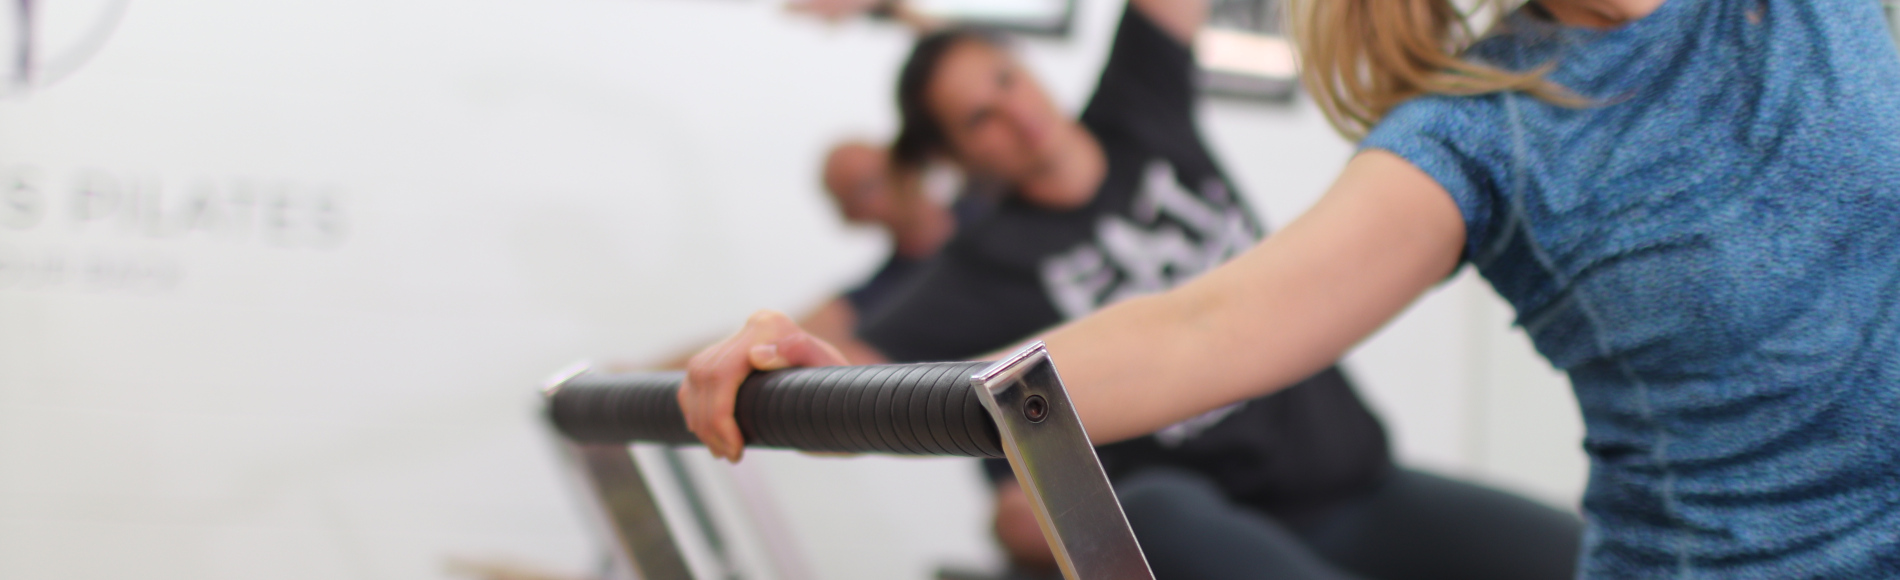 Reformer Pilates - Dynamic, Fun and Supportive